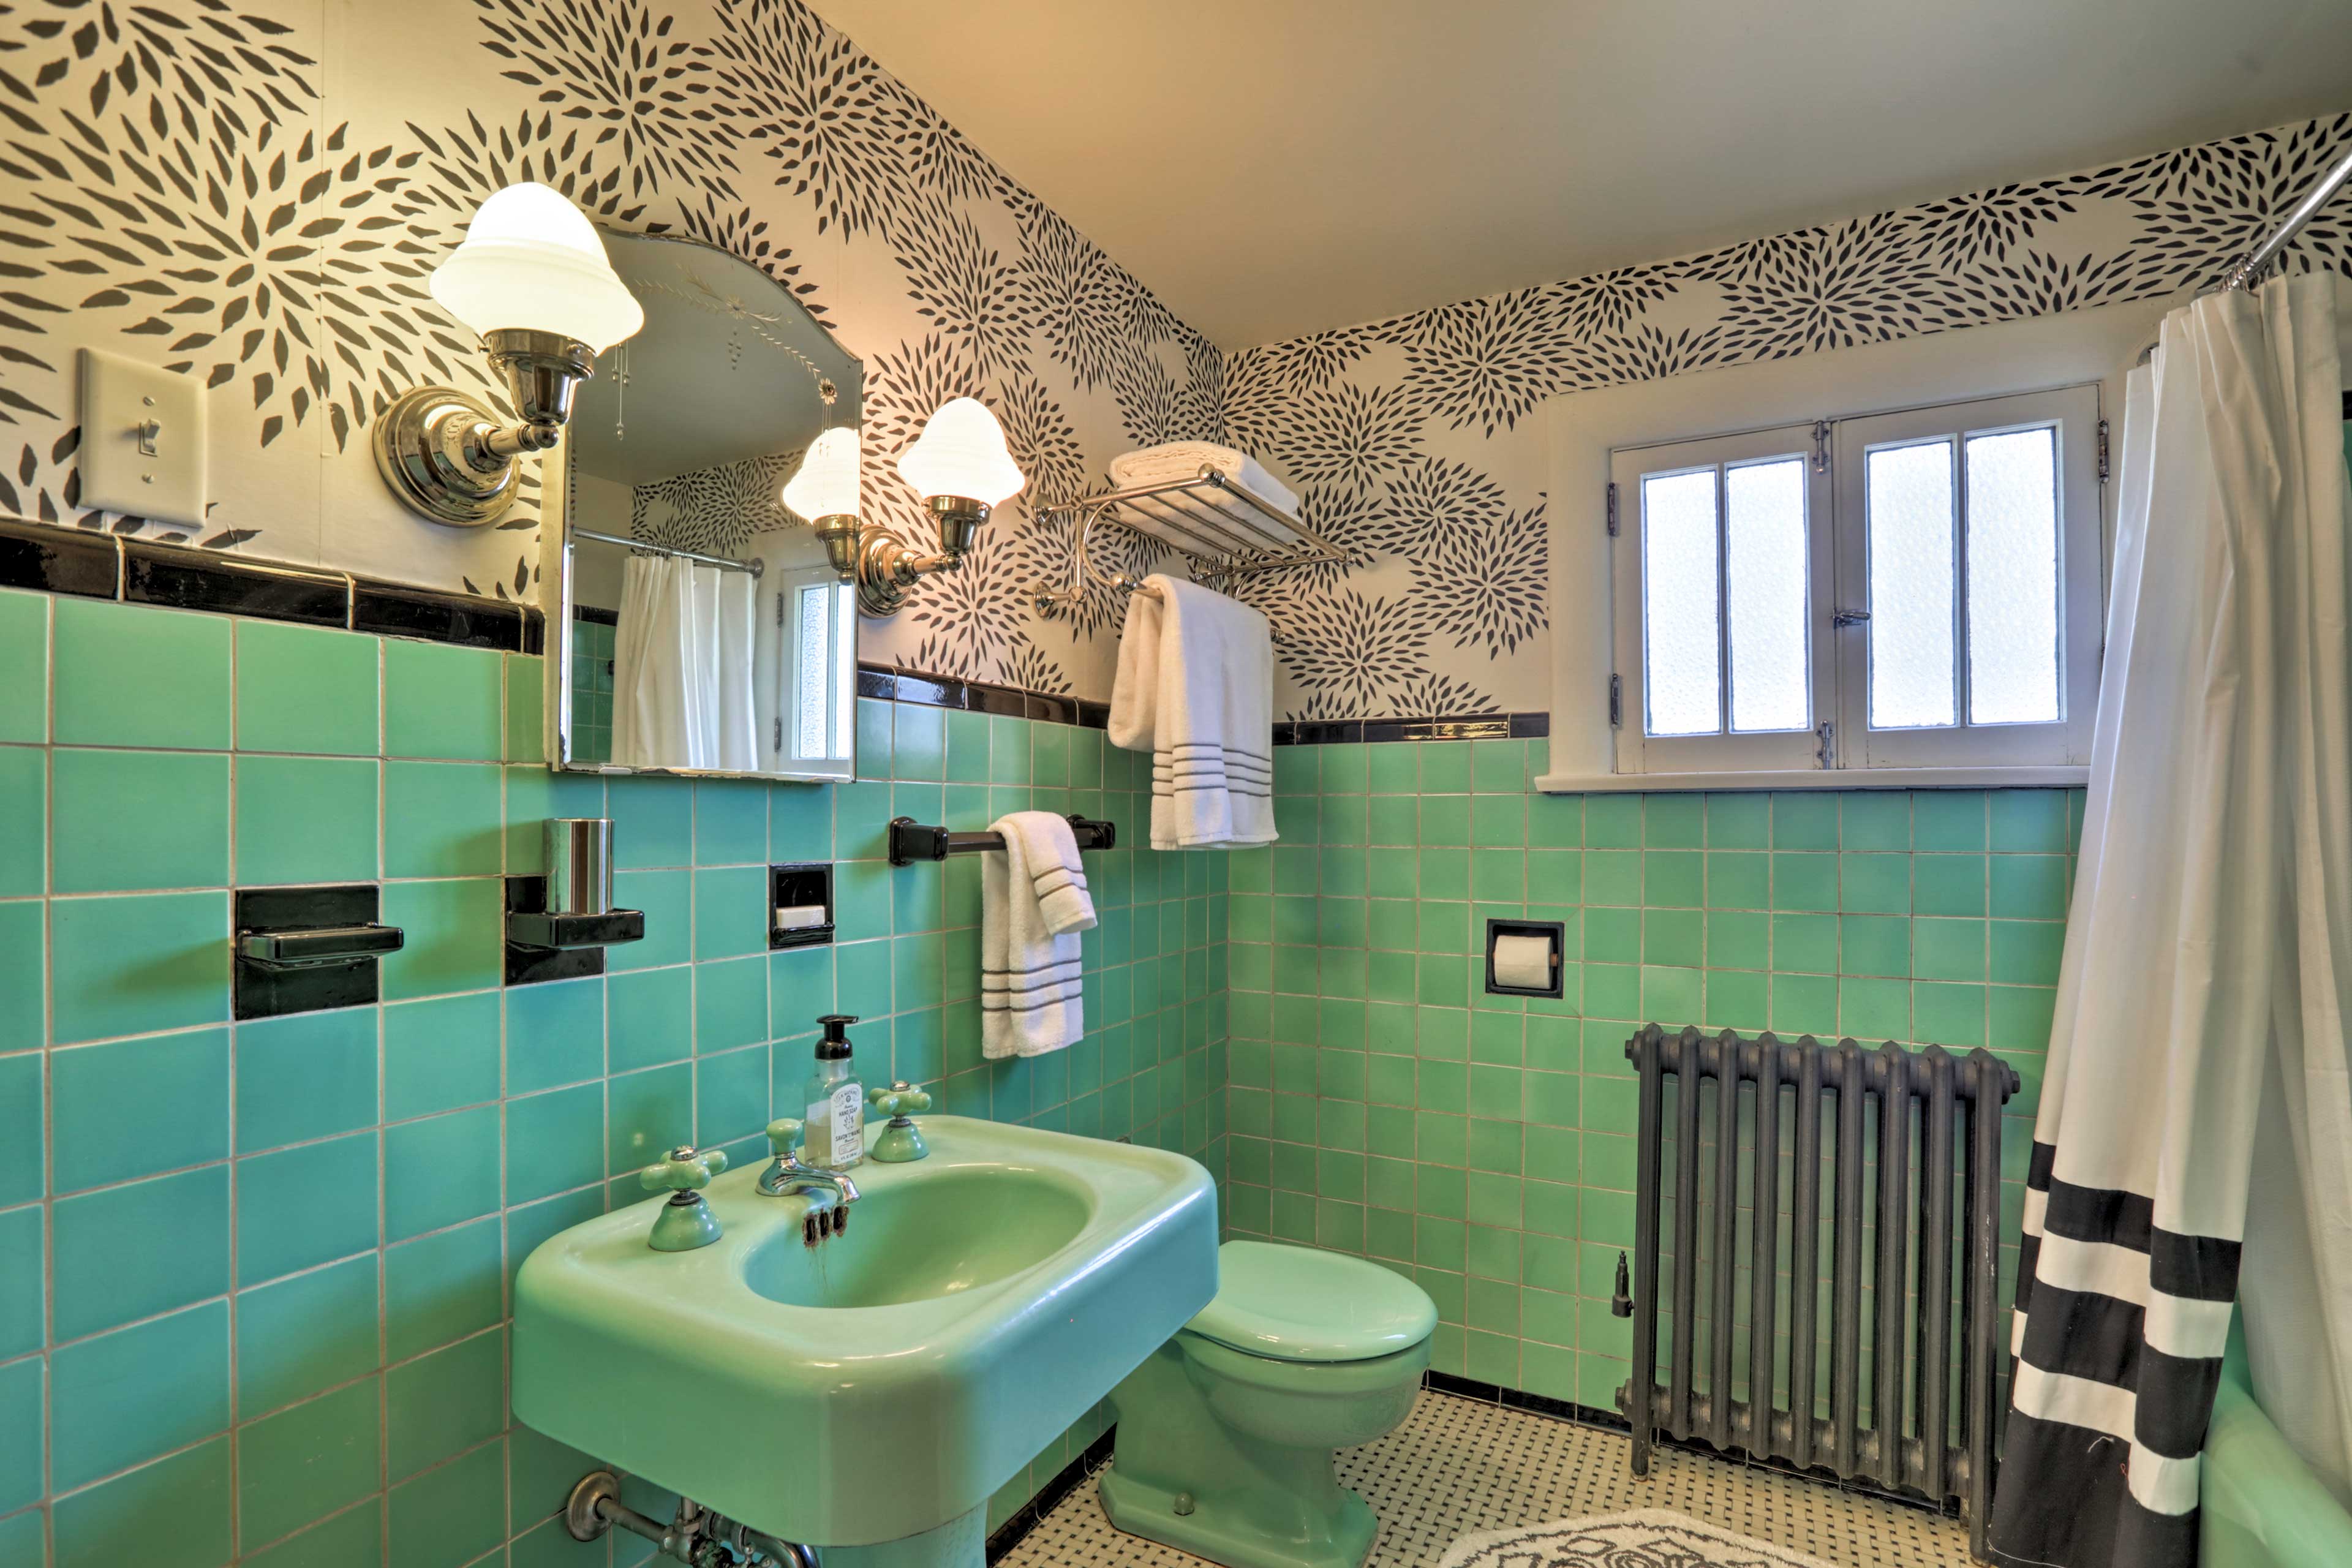 Is pink not your color? Choose to get ready in this fun green bathroom.